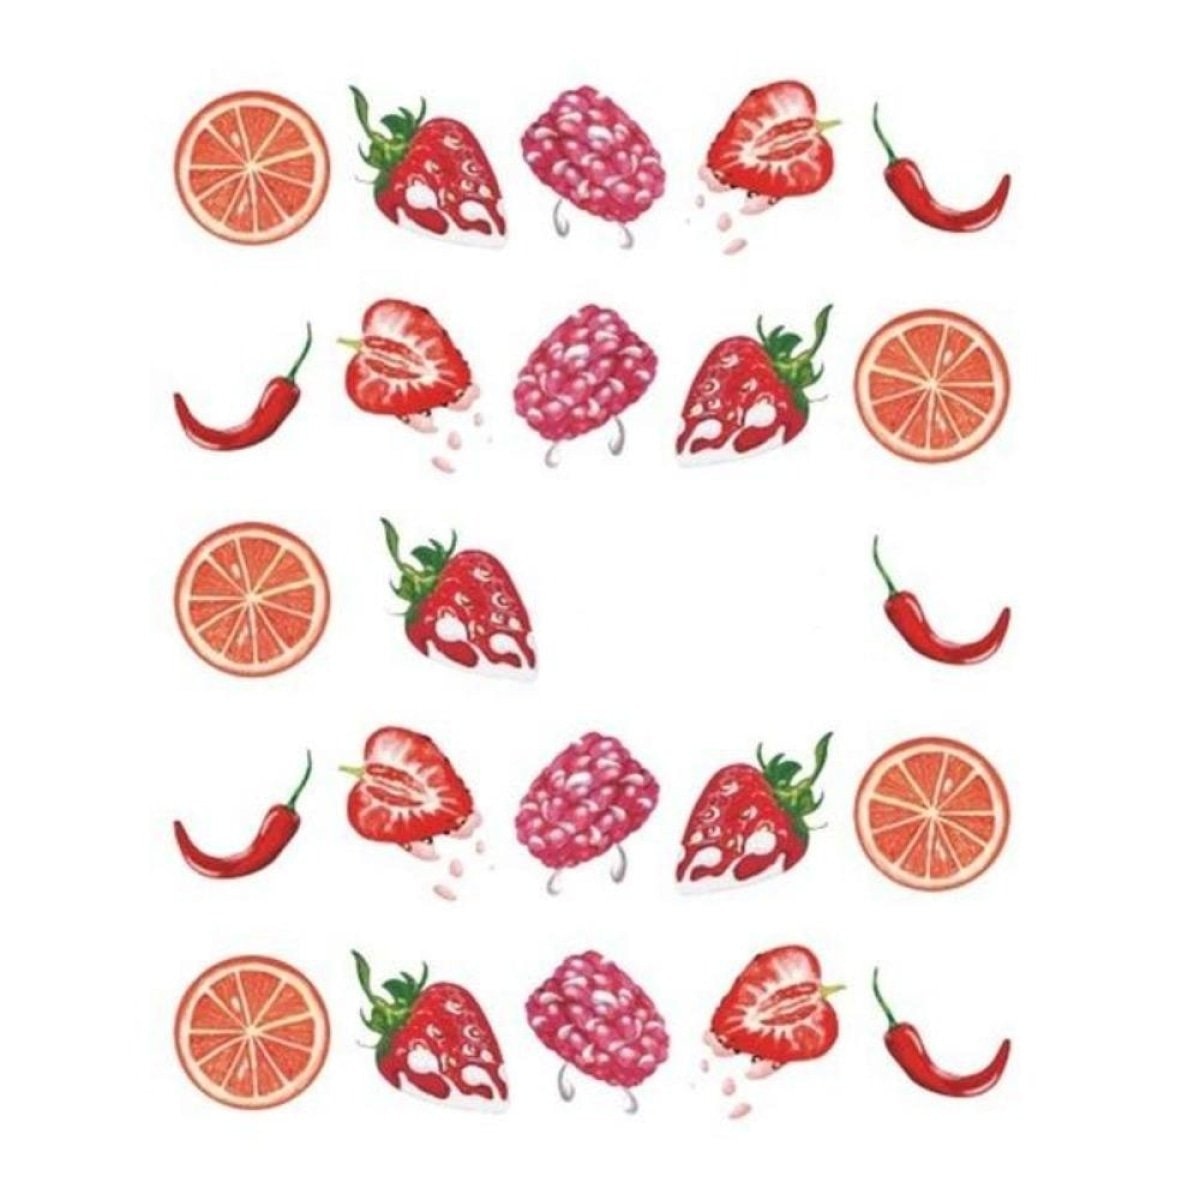 Strawberry Summer Cake & Fruit Stickers For Nails Nail Manicure Art Stz-494 - Sheet